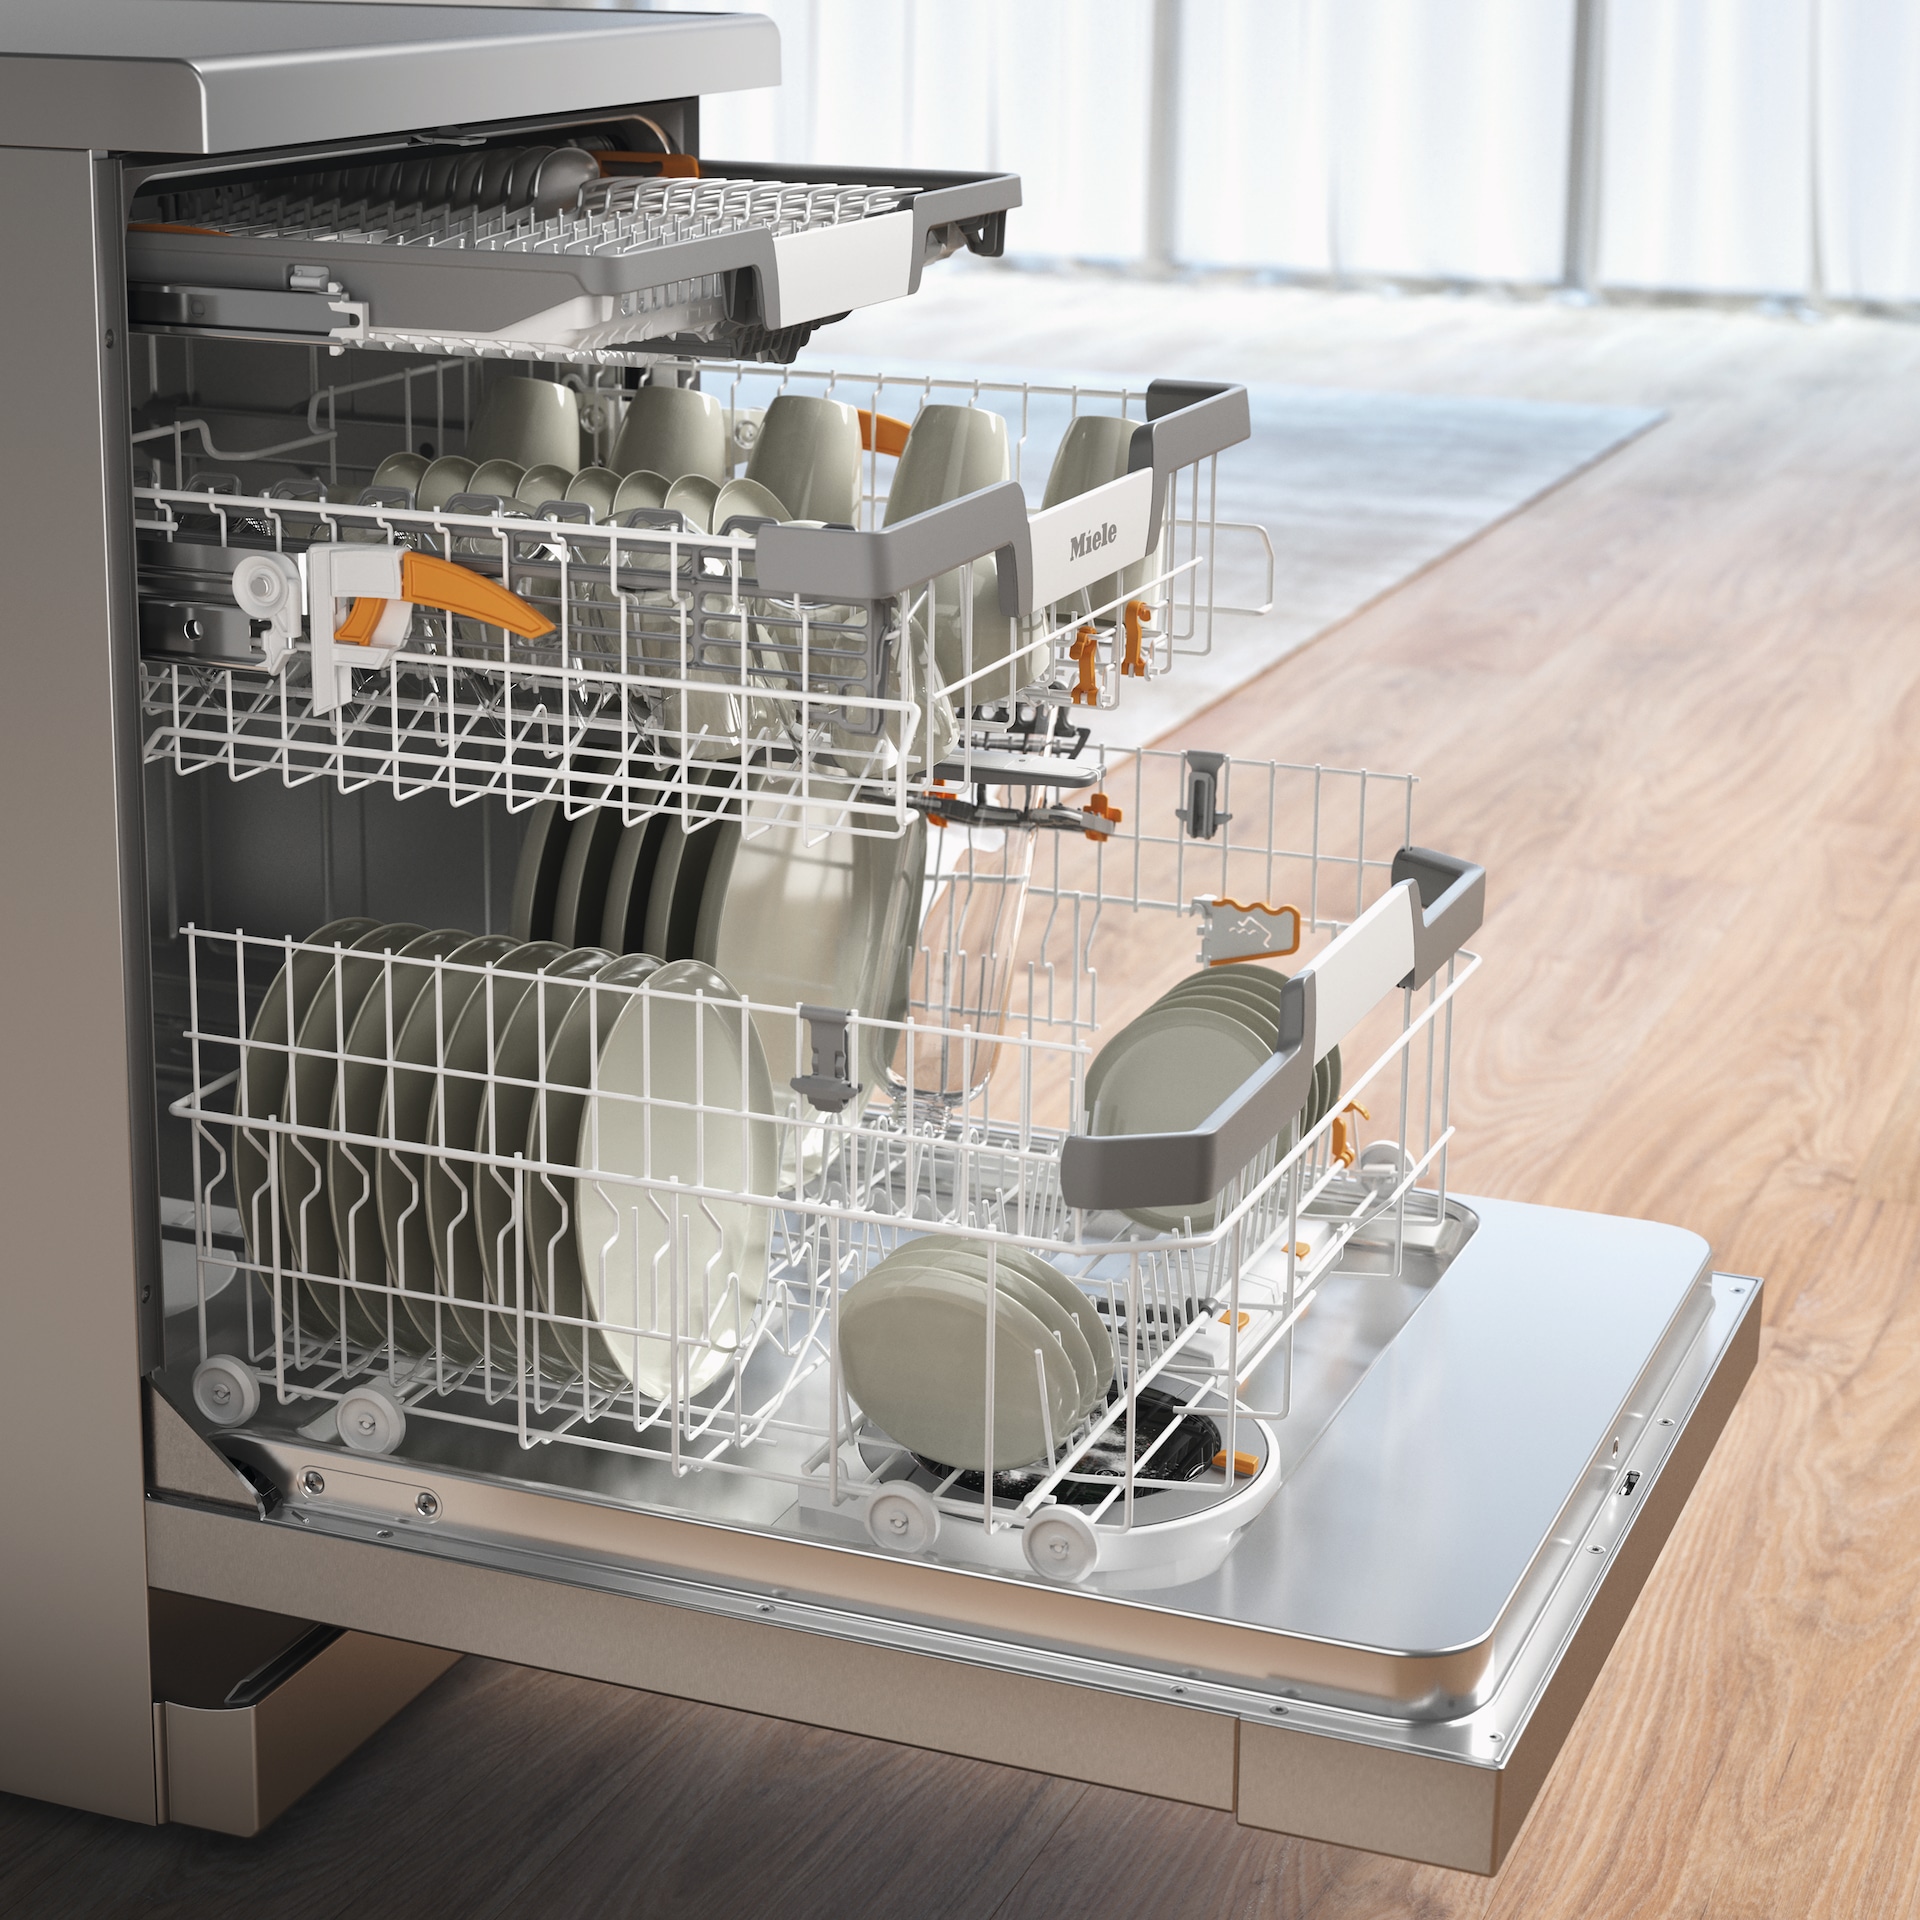 Dishwashers - G 7130 SC Front AutoDos CleanSteel front - 4